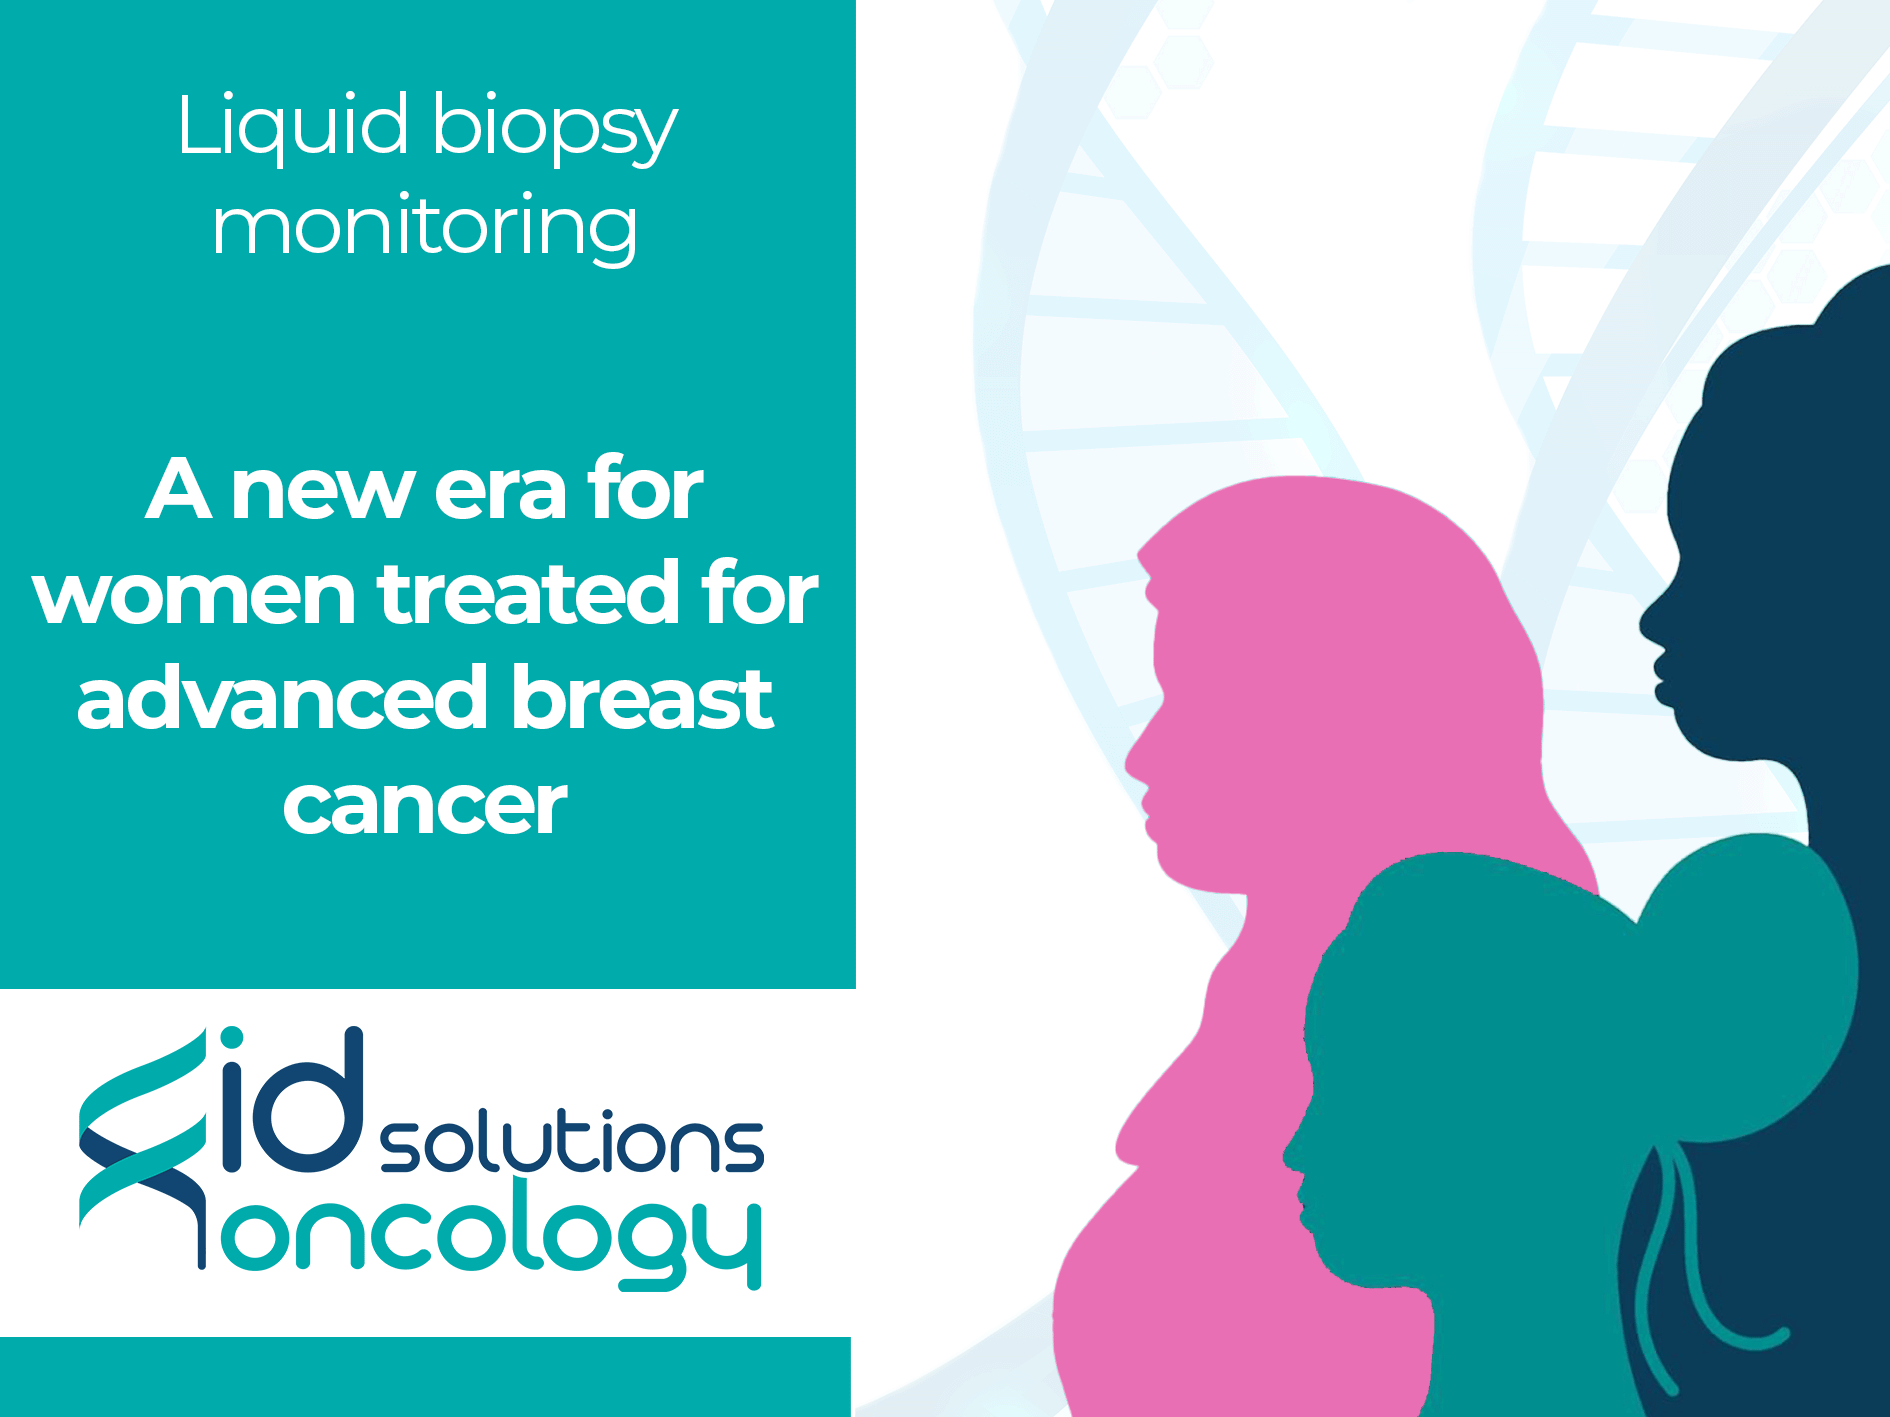 Liquid biopsy follow-up: A new era for women treated for advanced breast cancer